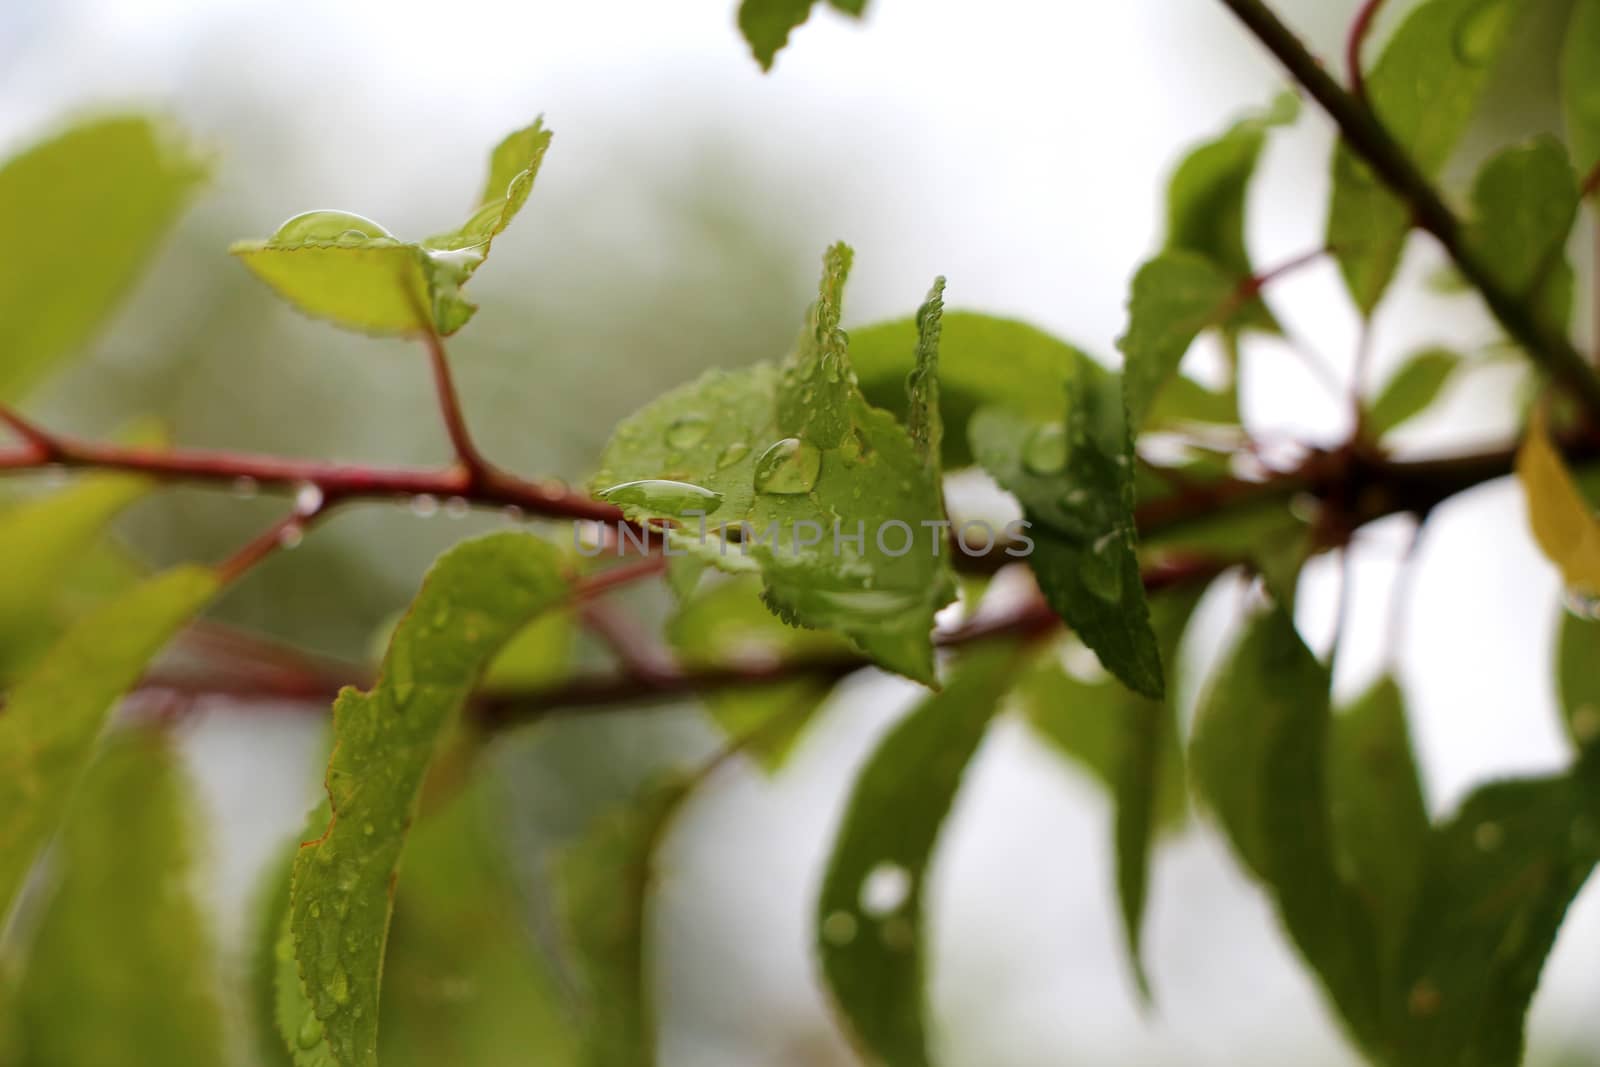 Macro tree branch with raindrops, dew on leaves close-up photogr by Sylverarts